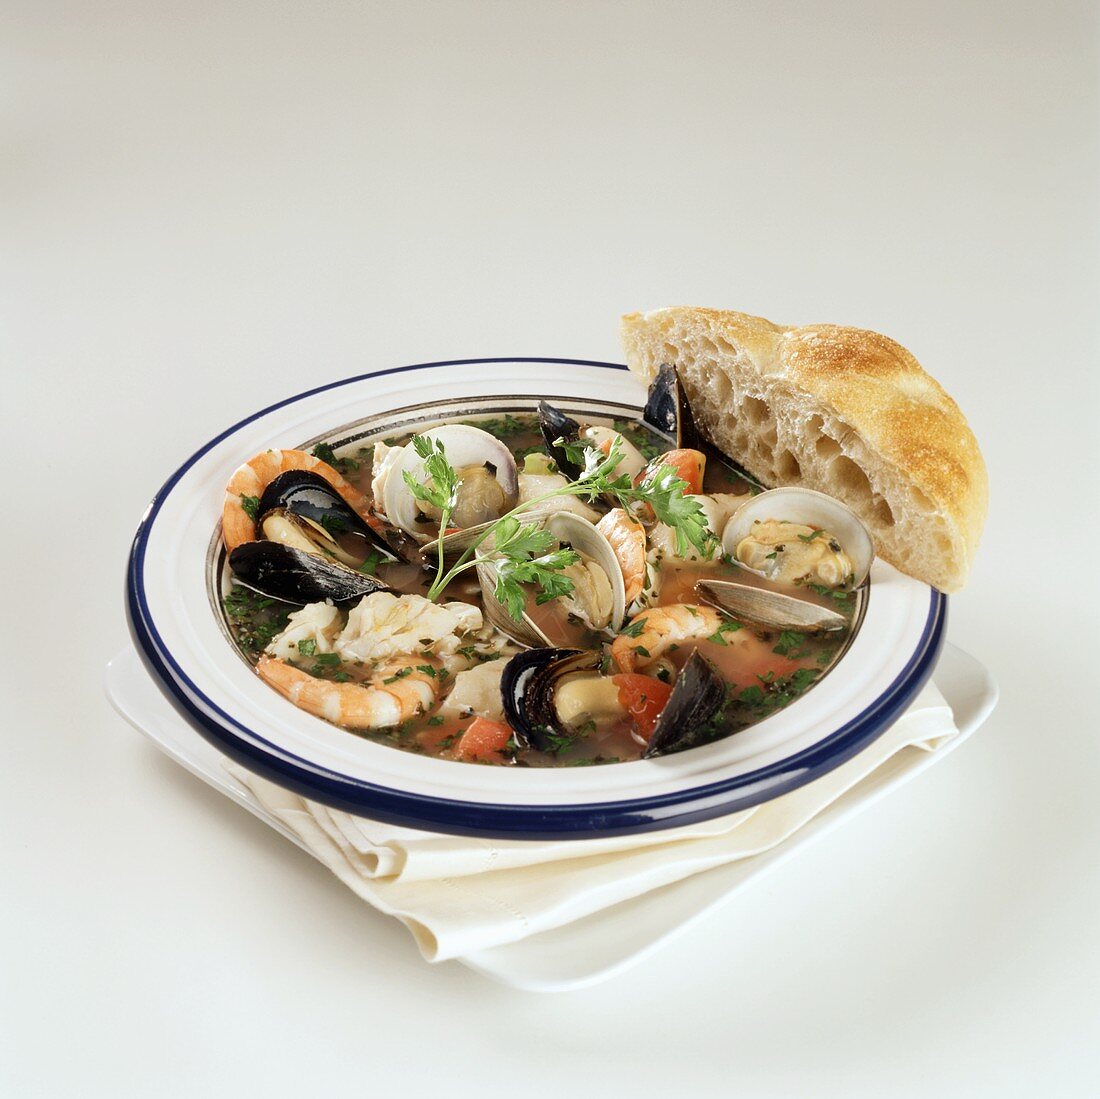 Cioppino (seafood stew) with bread